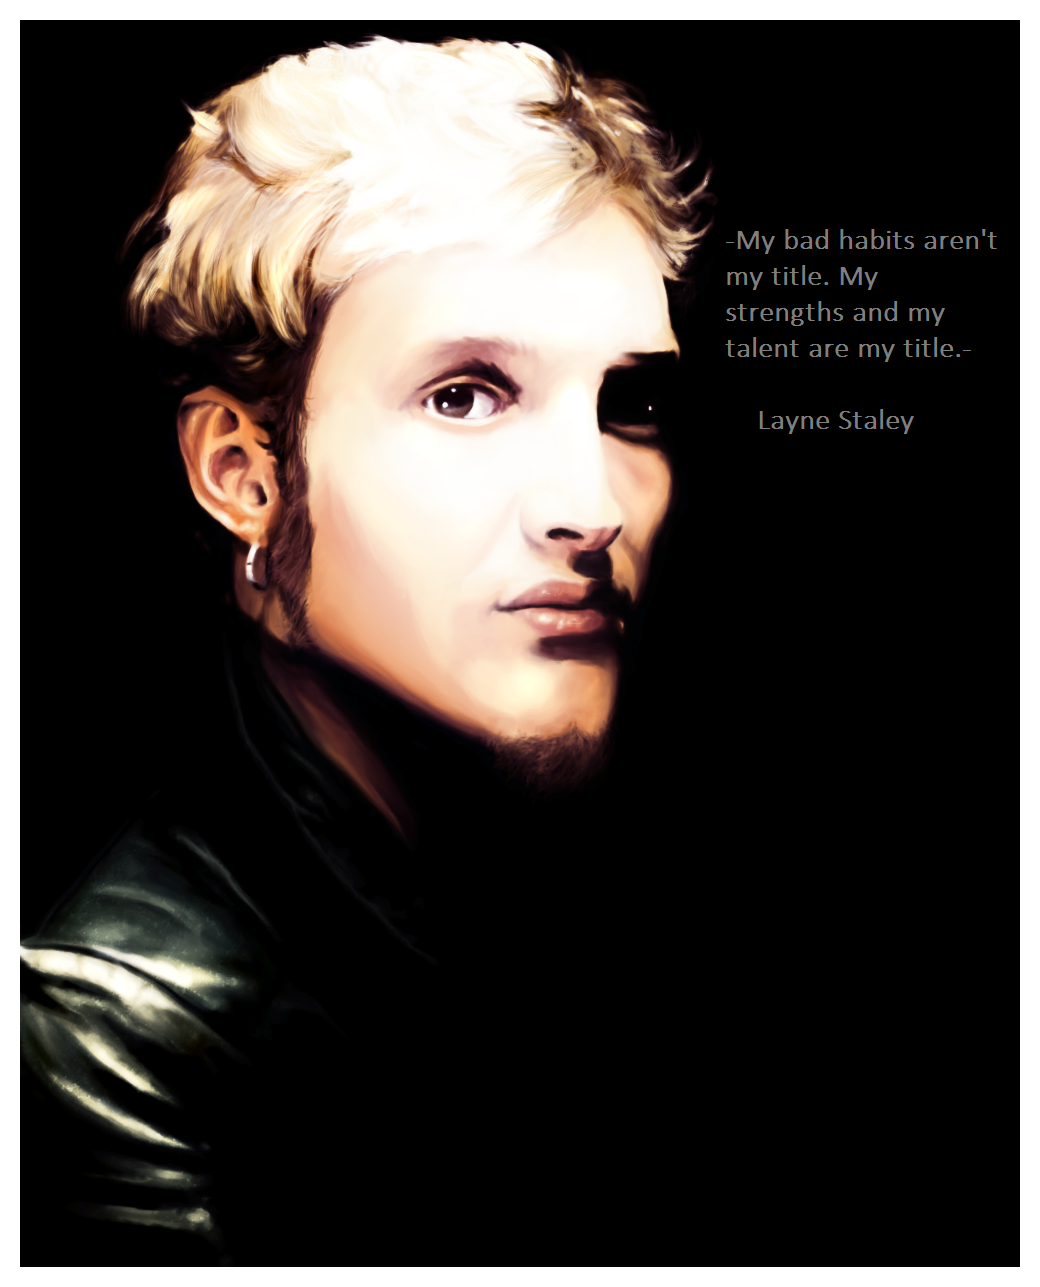 Layne Staley's quotes, famous and not much Quotes 2019